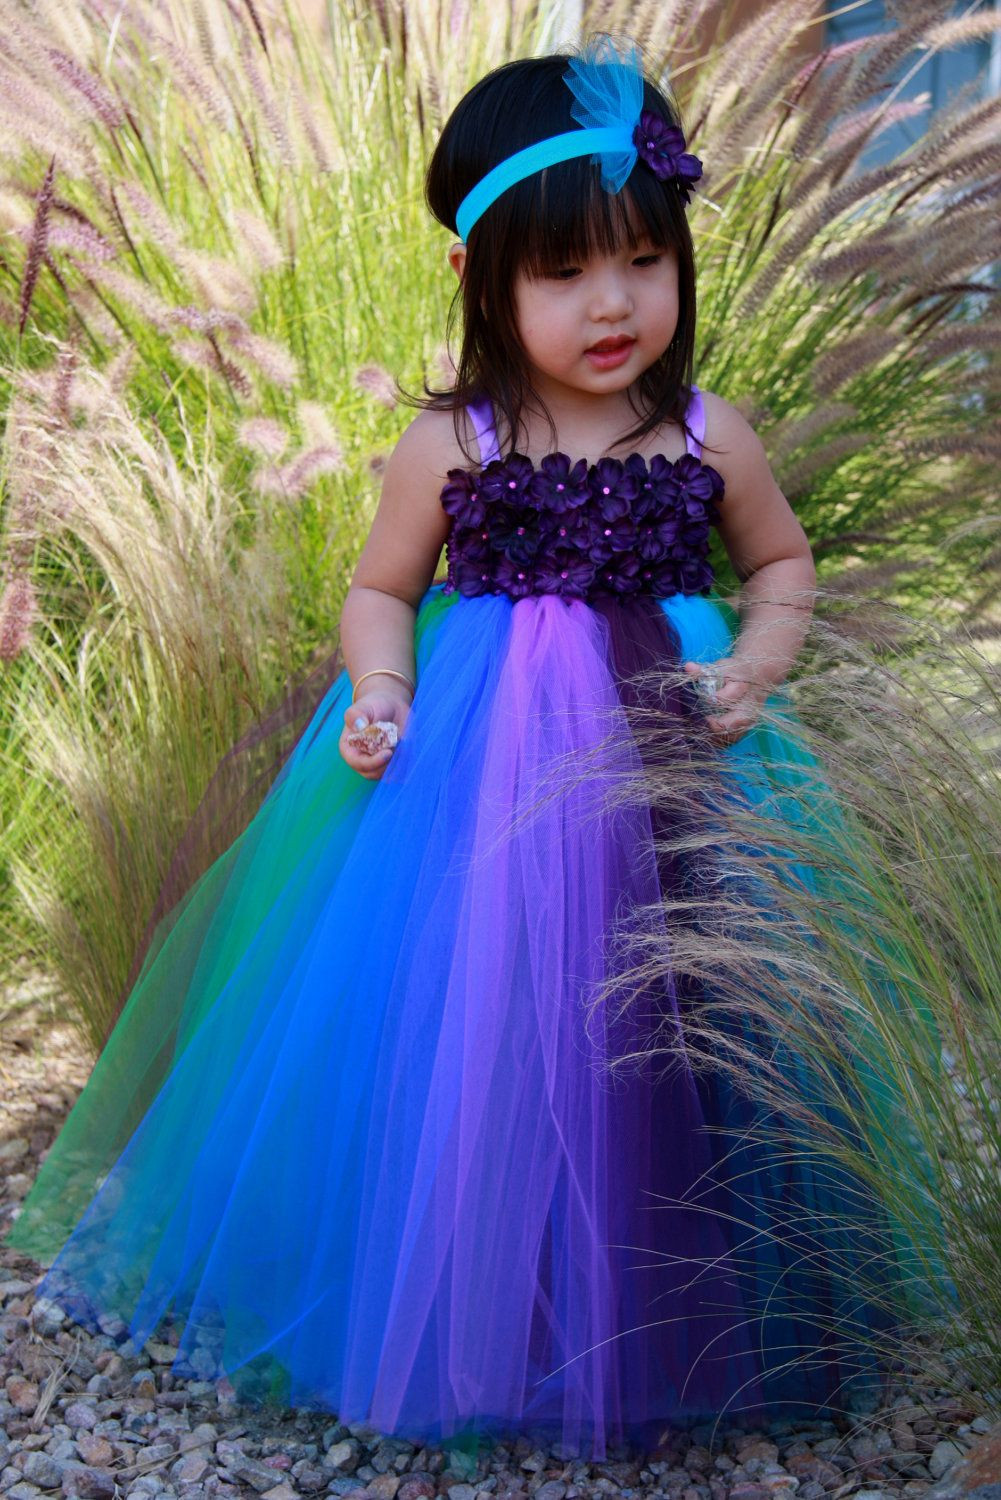 Diy Baby Tutu Dress
 Peacock Inspired Tutu Dress Series IV by giselleboutique